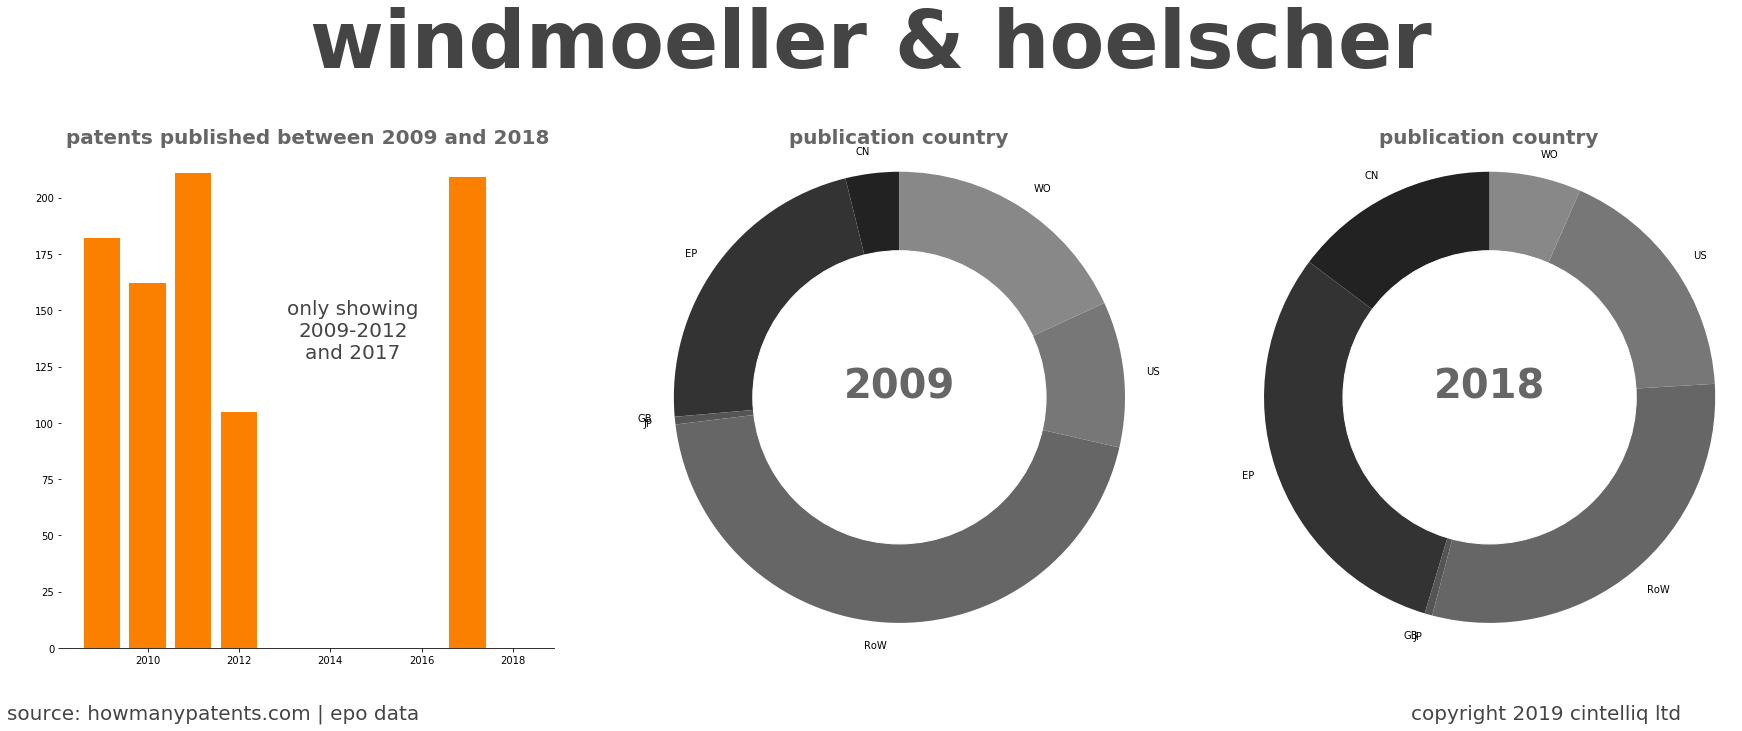 summary of patents for Windmoeller & Hoelscher